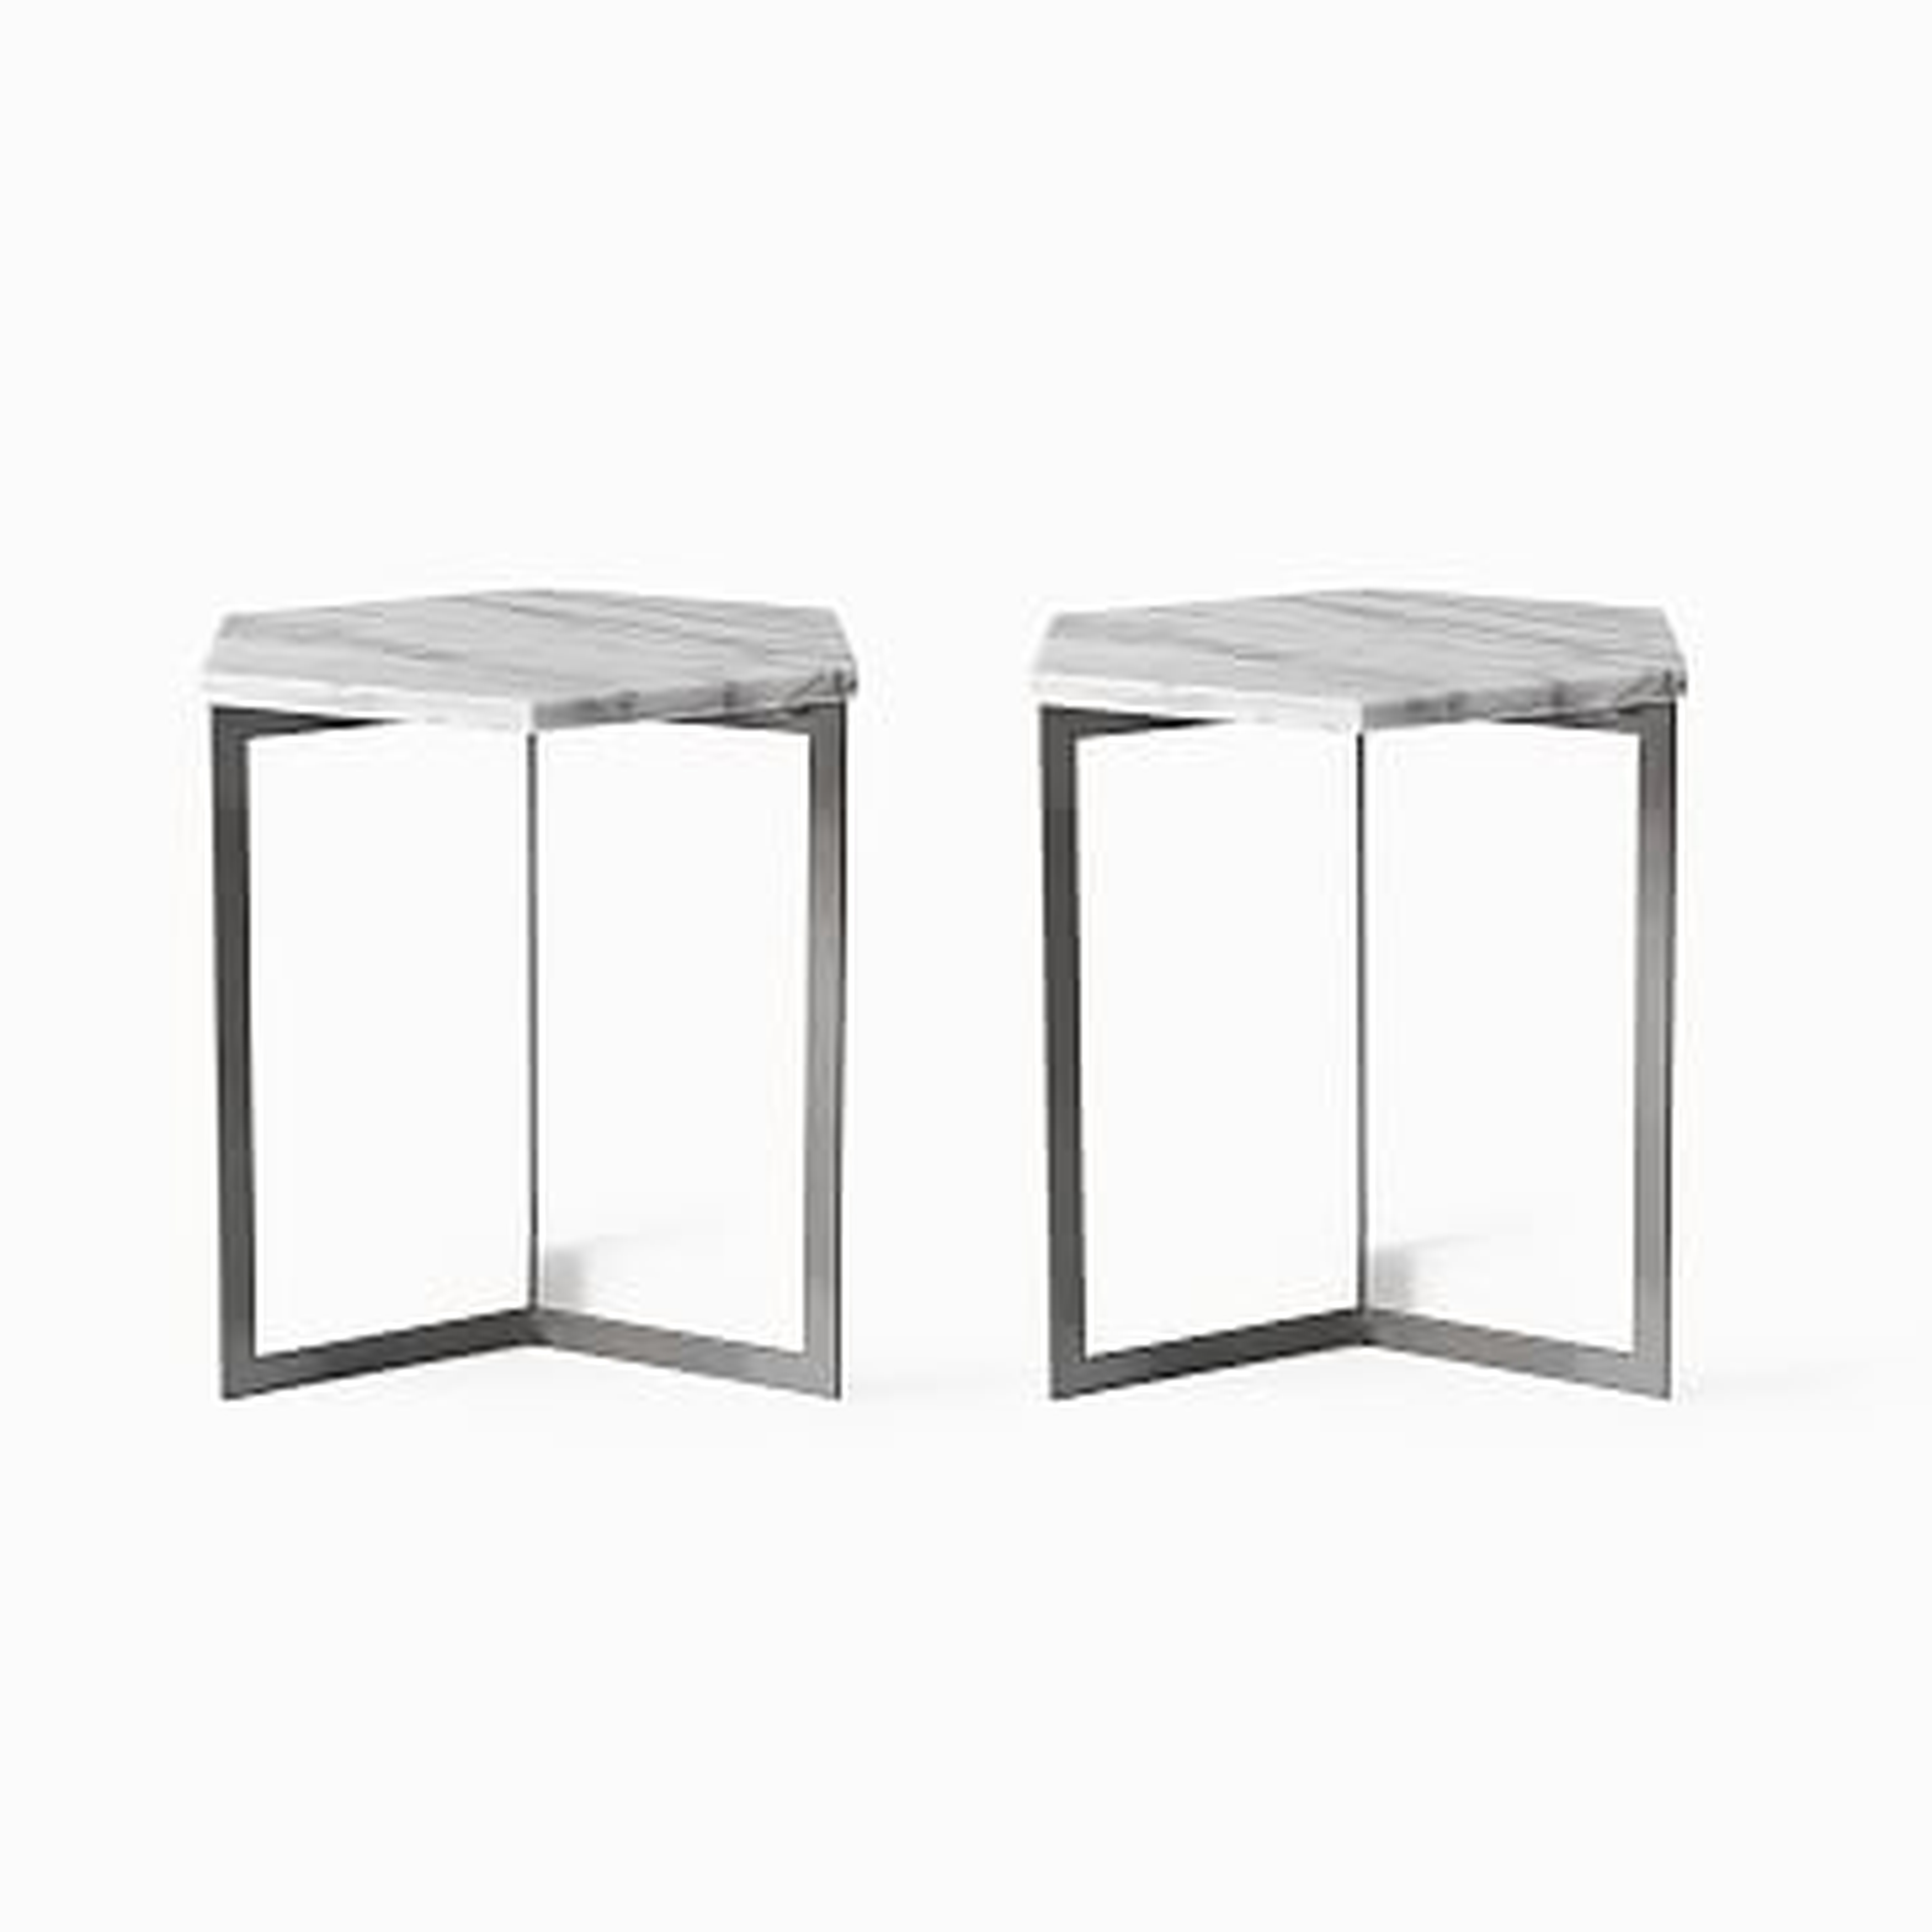 Hex Side Table, White Marble/Raw Steel, Set of 2 - West Elm